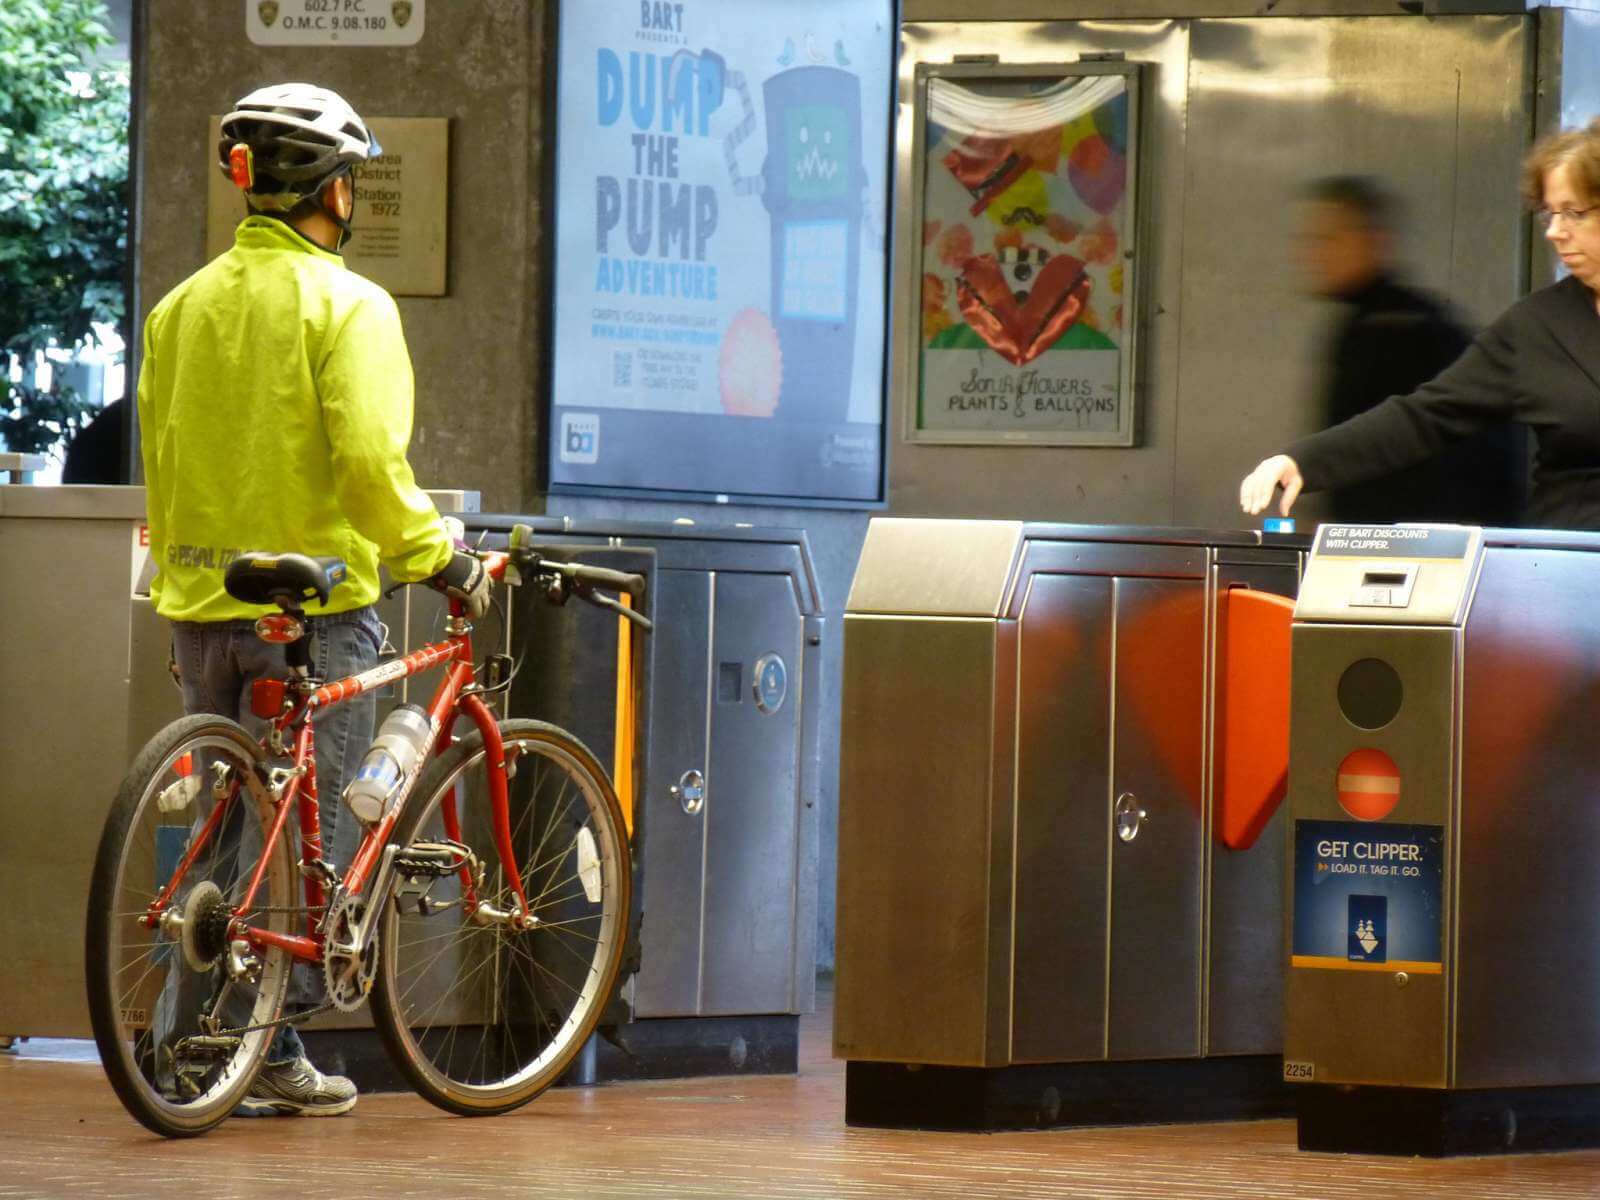 Cyclists will be allowed to travel on BART during peak commute hours except in the first three cars. (Robert Prinz/Flickr)